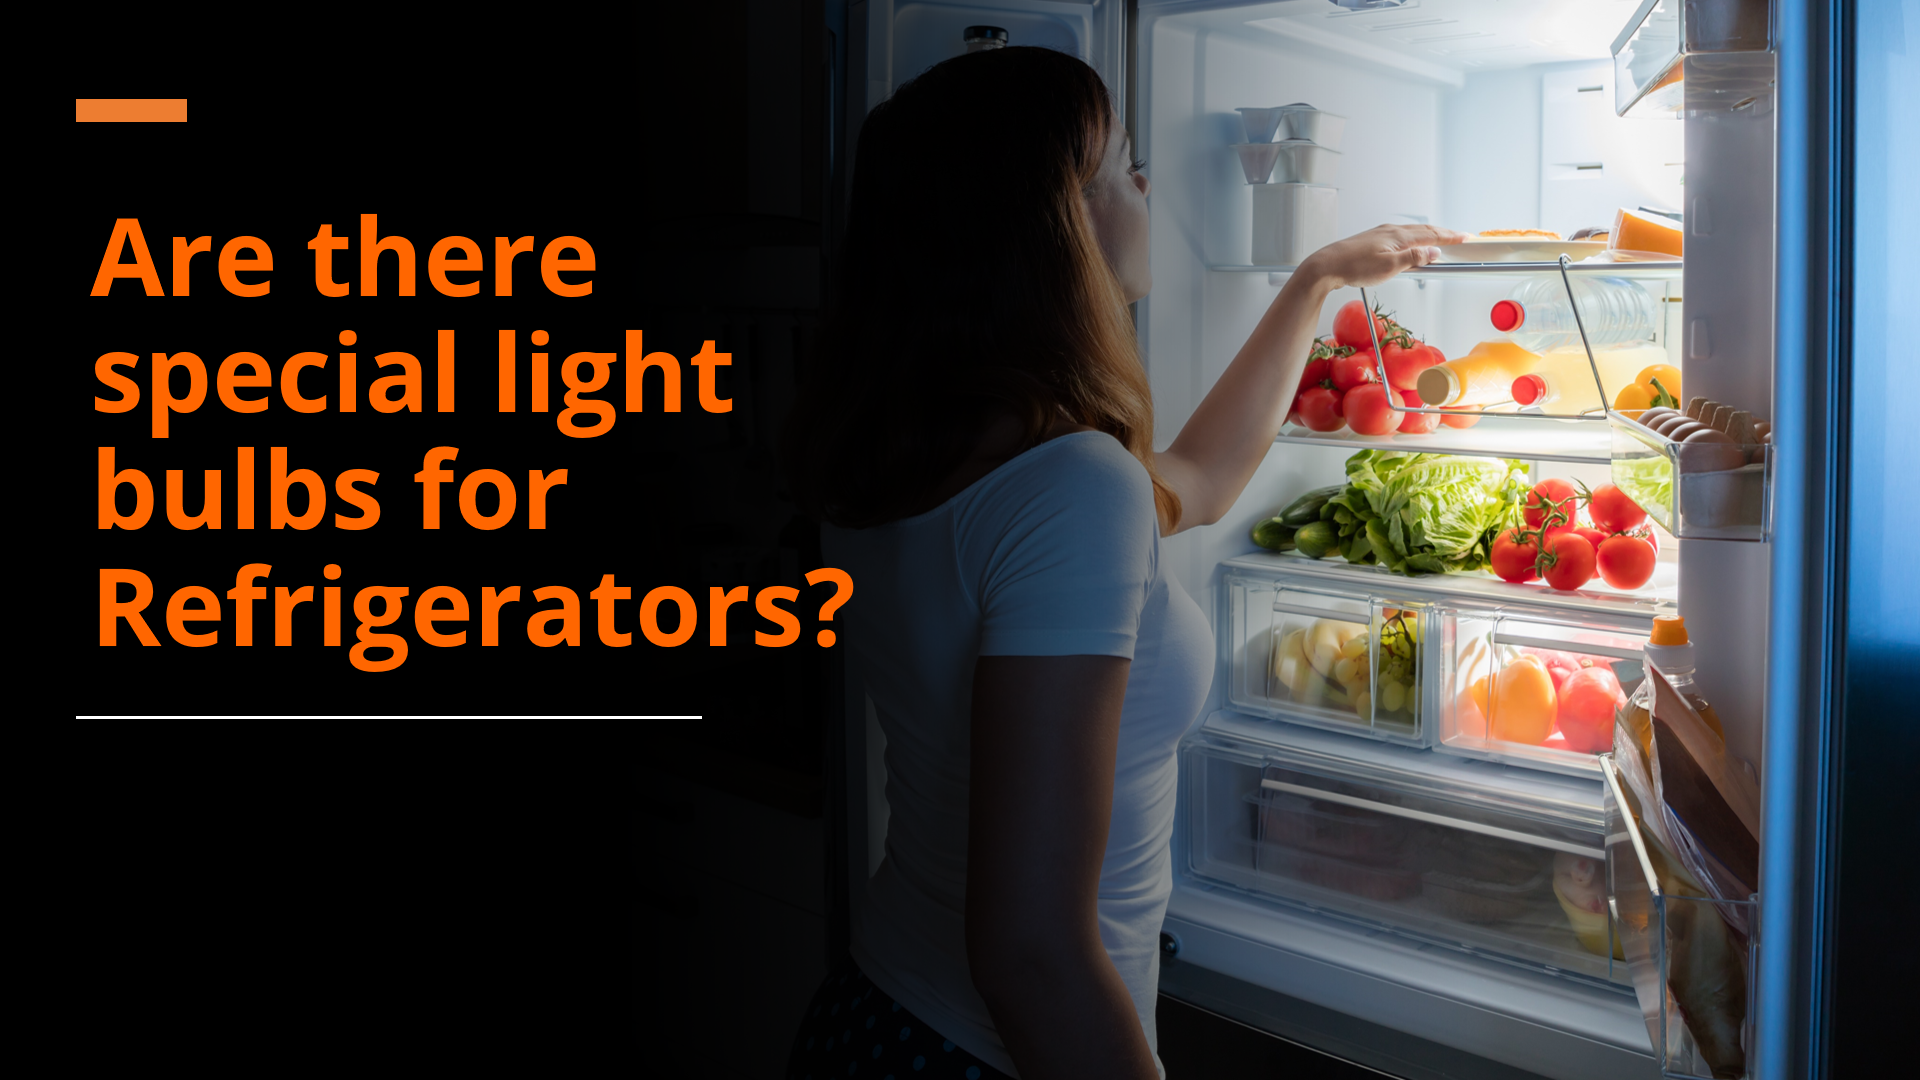 Are there special light bulbs for Refrigerators